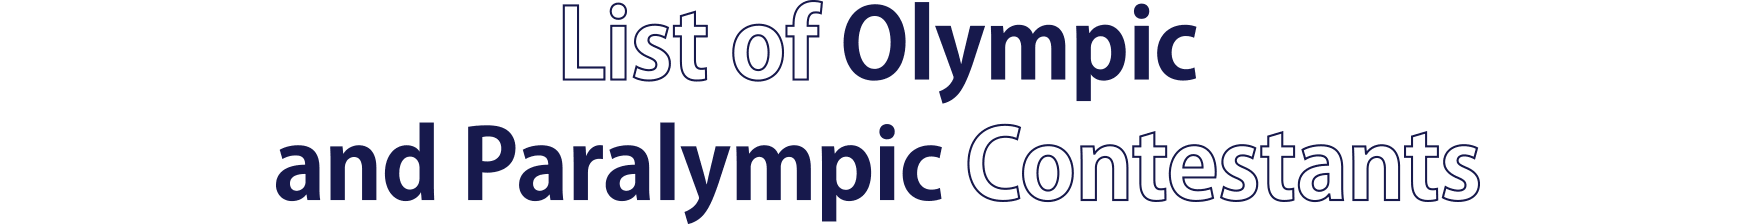 List of Olympic and Paralympic Contestants